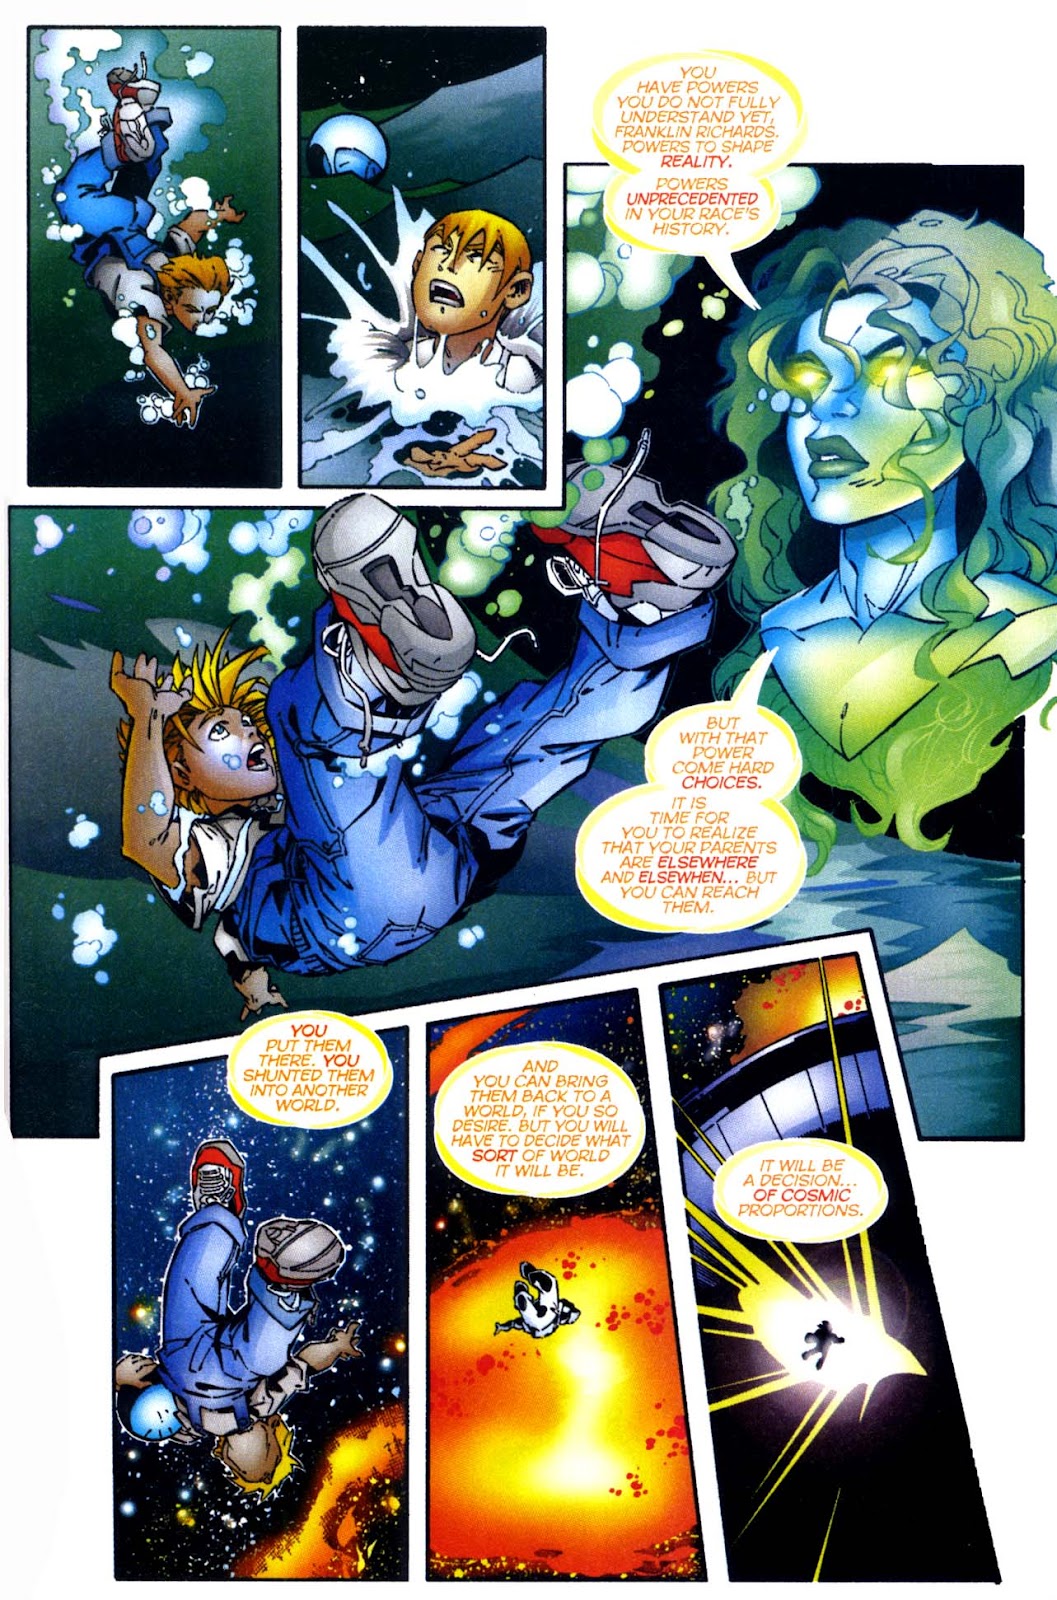 Heroes Reborn: The Return issue 1 - Page 10